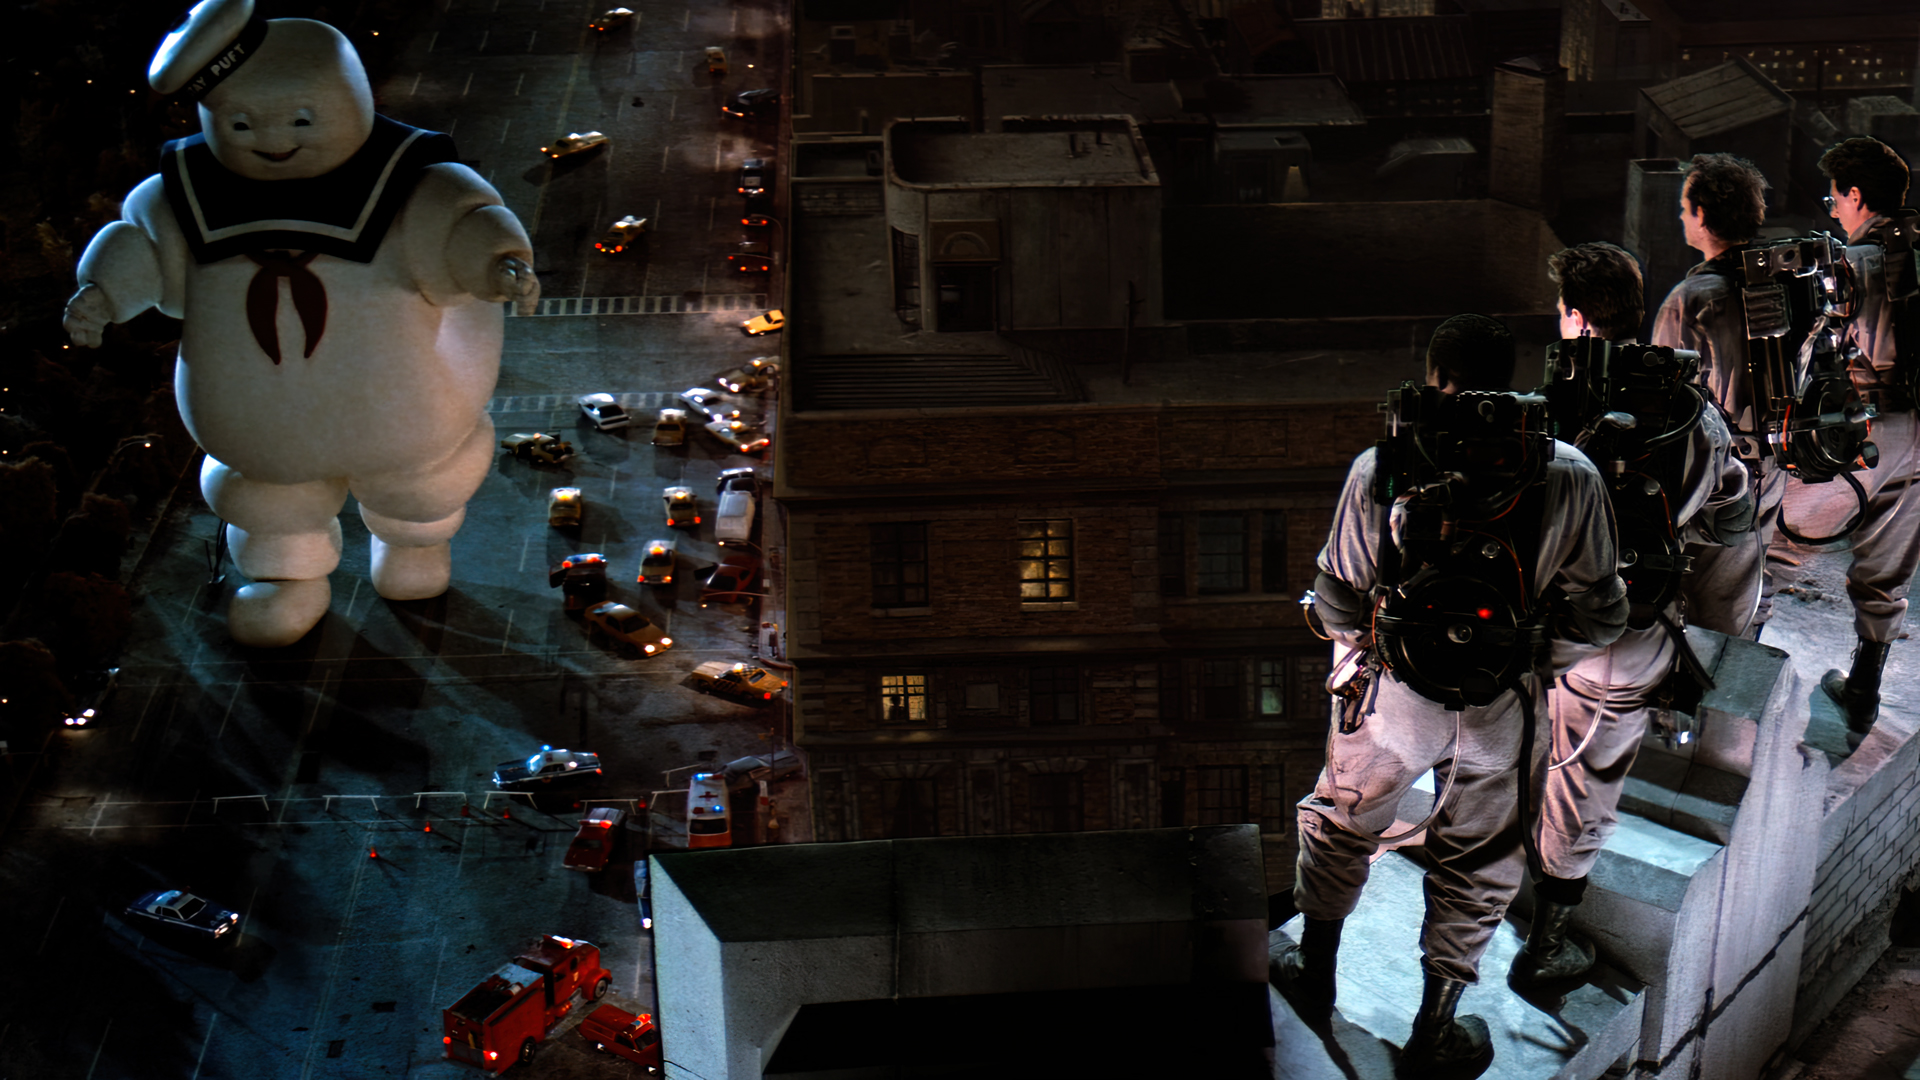 Ghostbusters Movies Film Stills New York City Building Car Stay Puft Marshmallow Man Street Rooftops 1920x1080